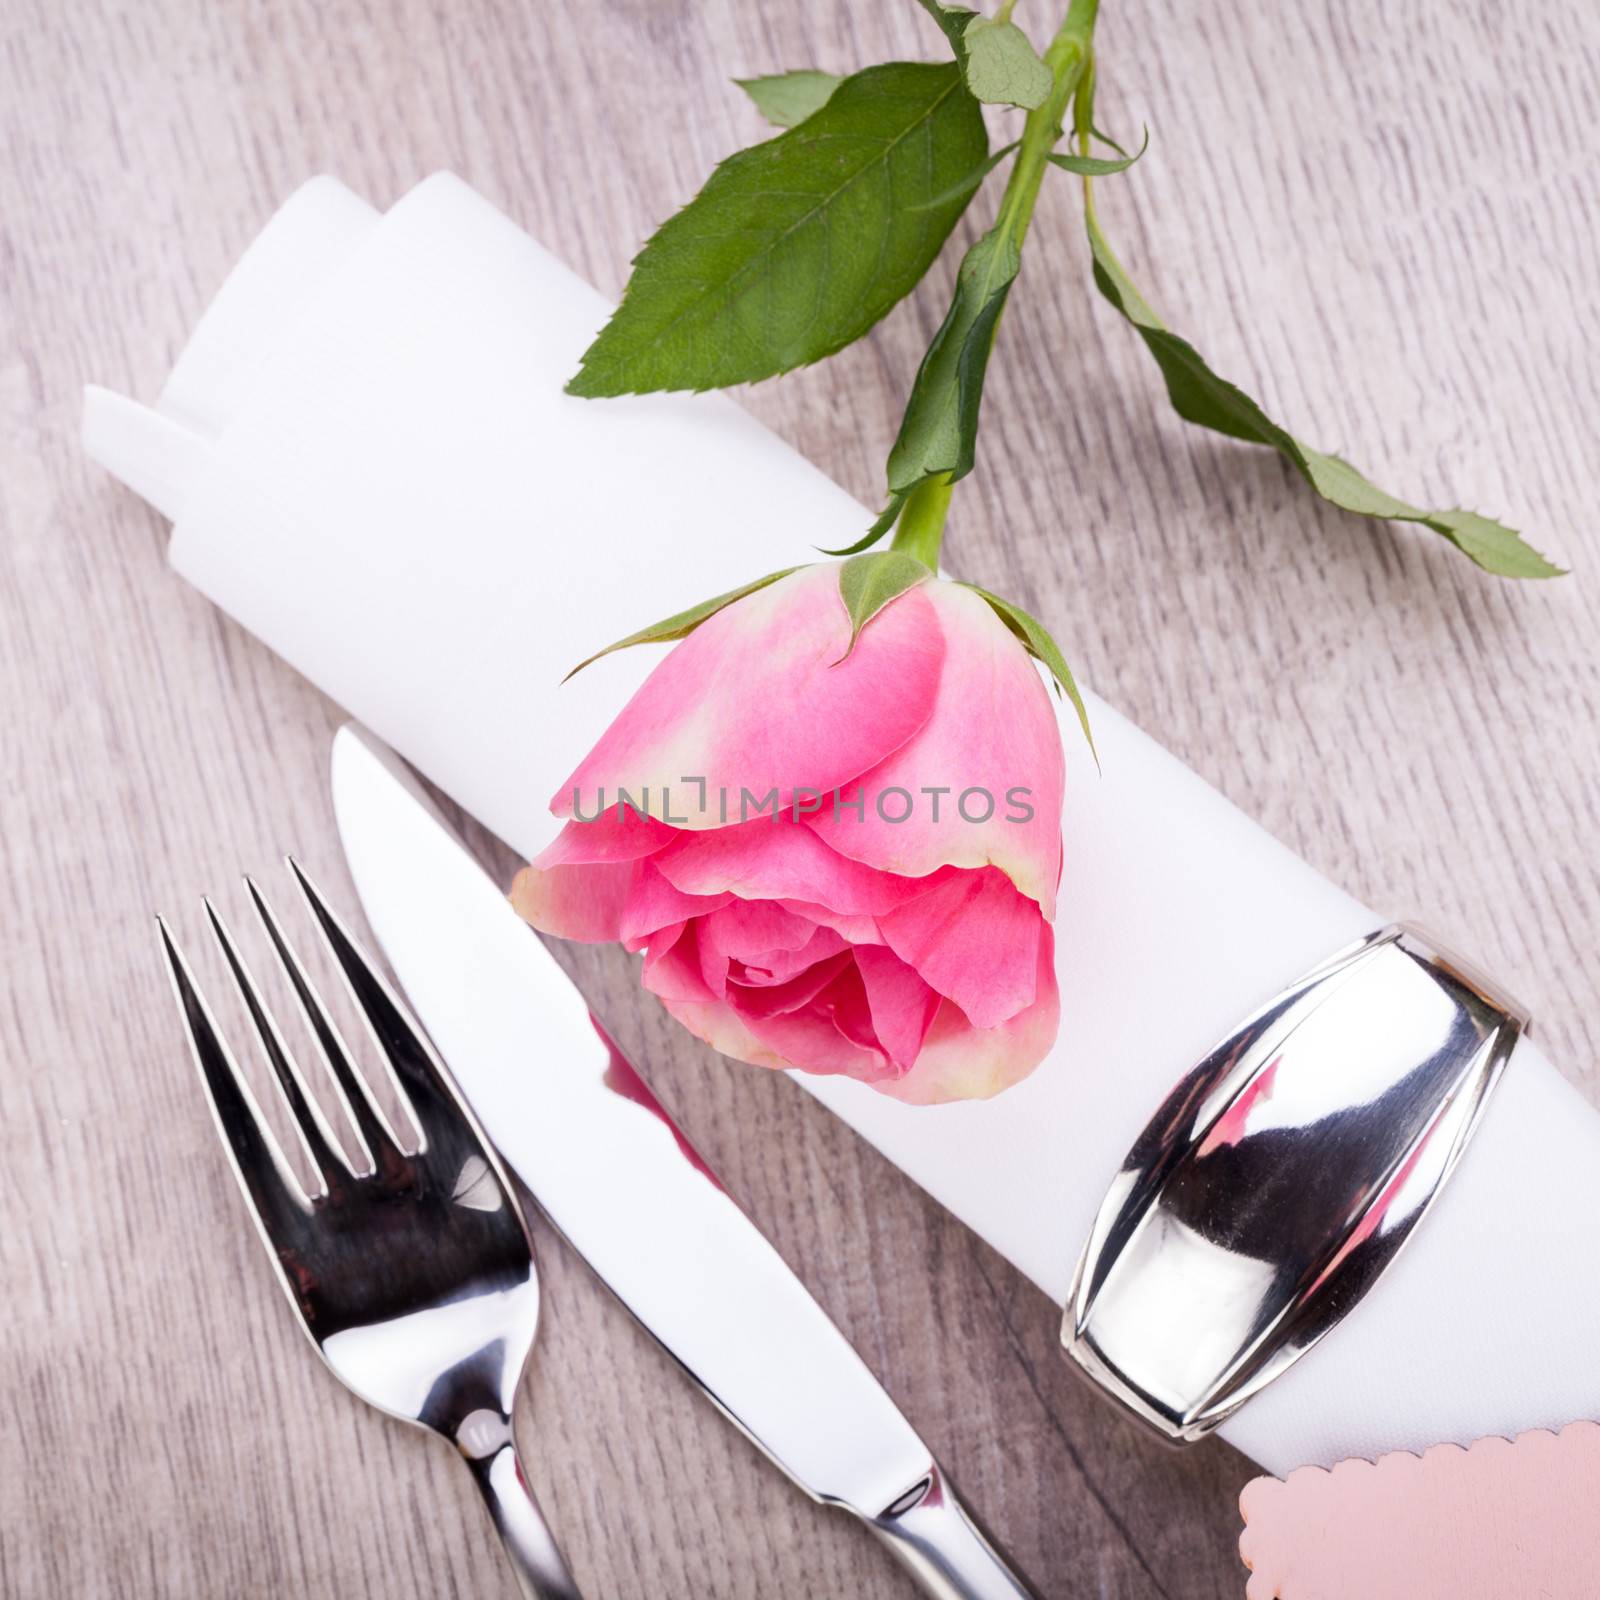 Table setting with a single pink rose by juniart